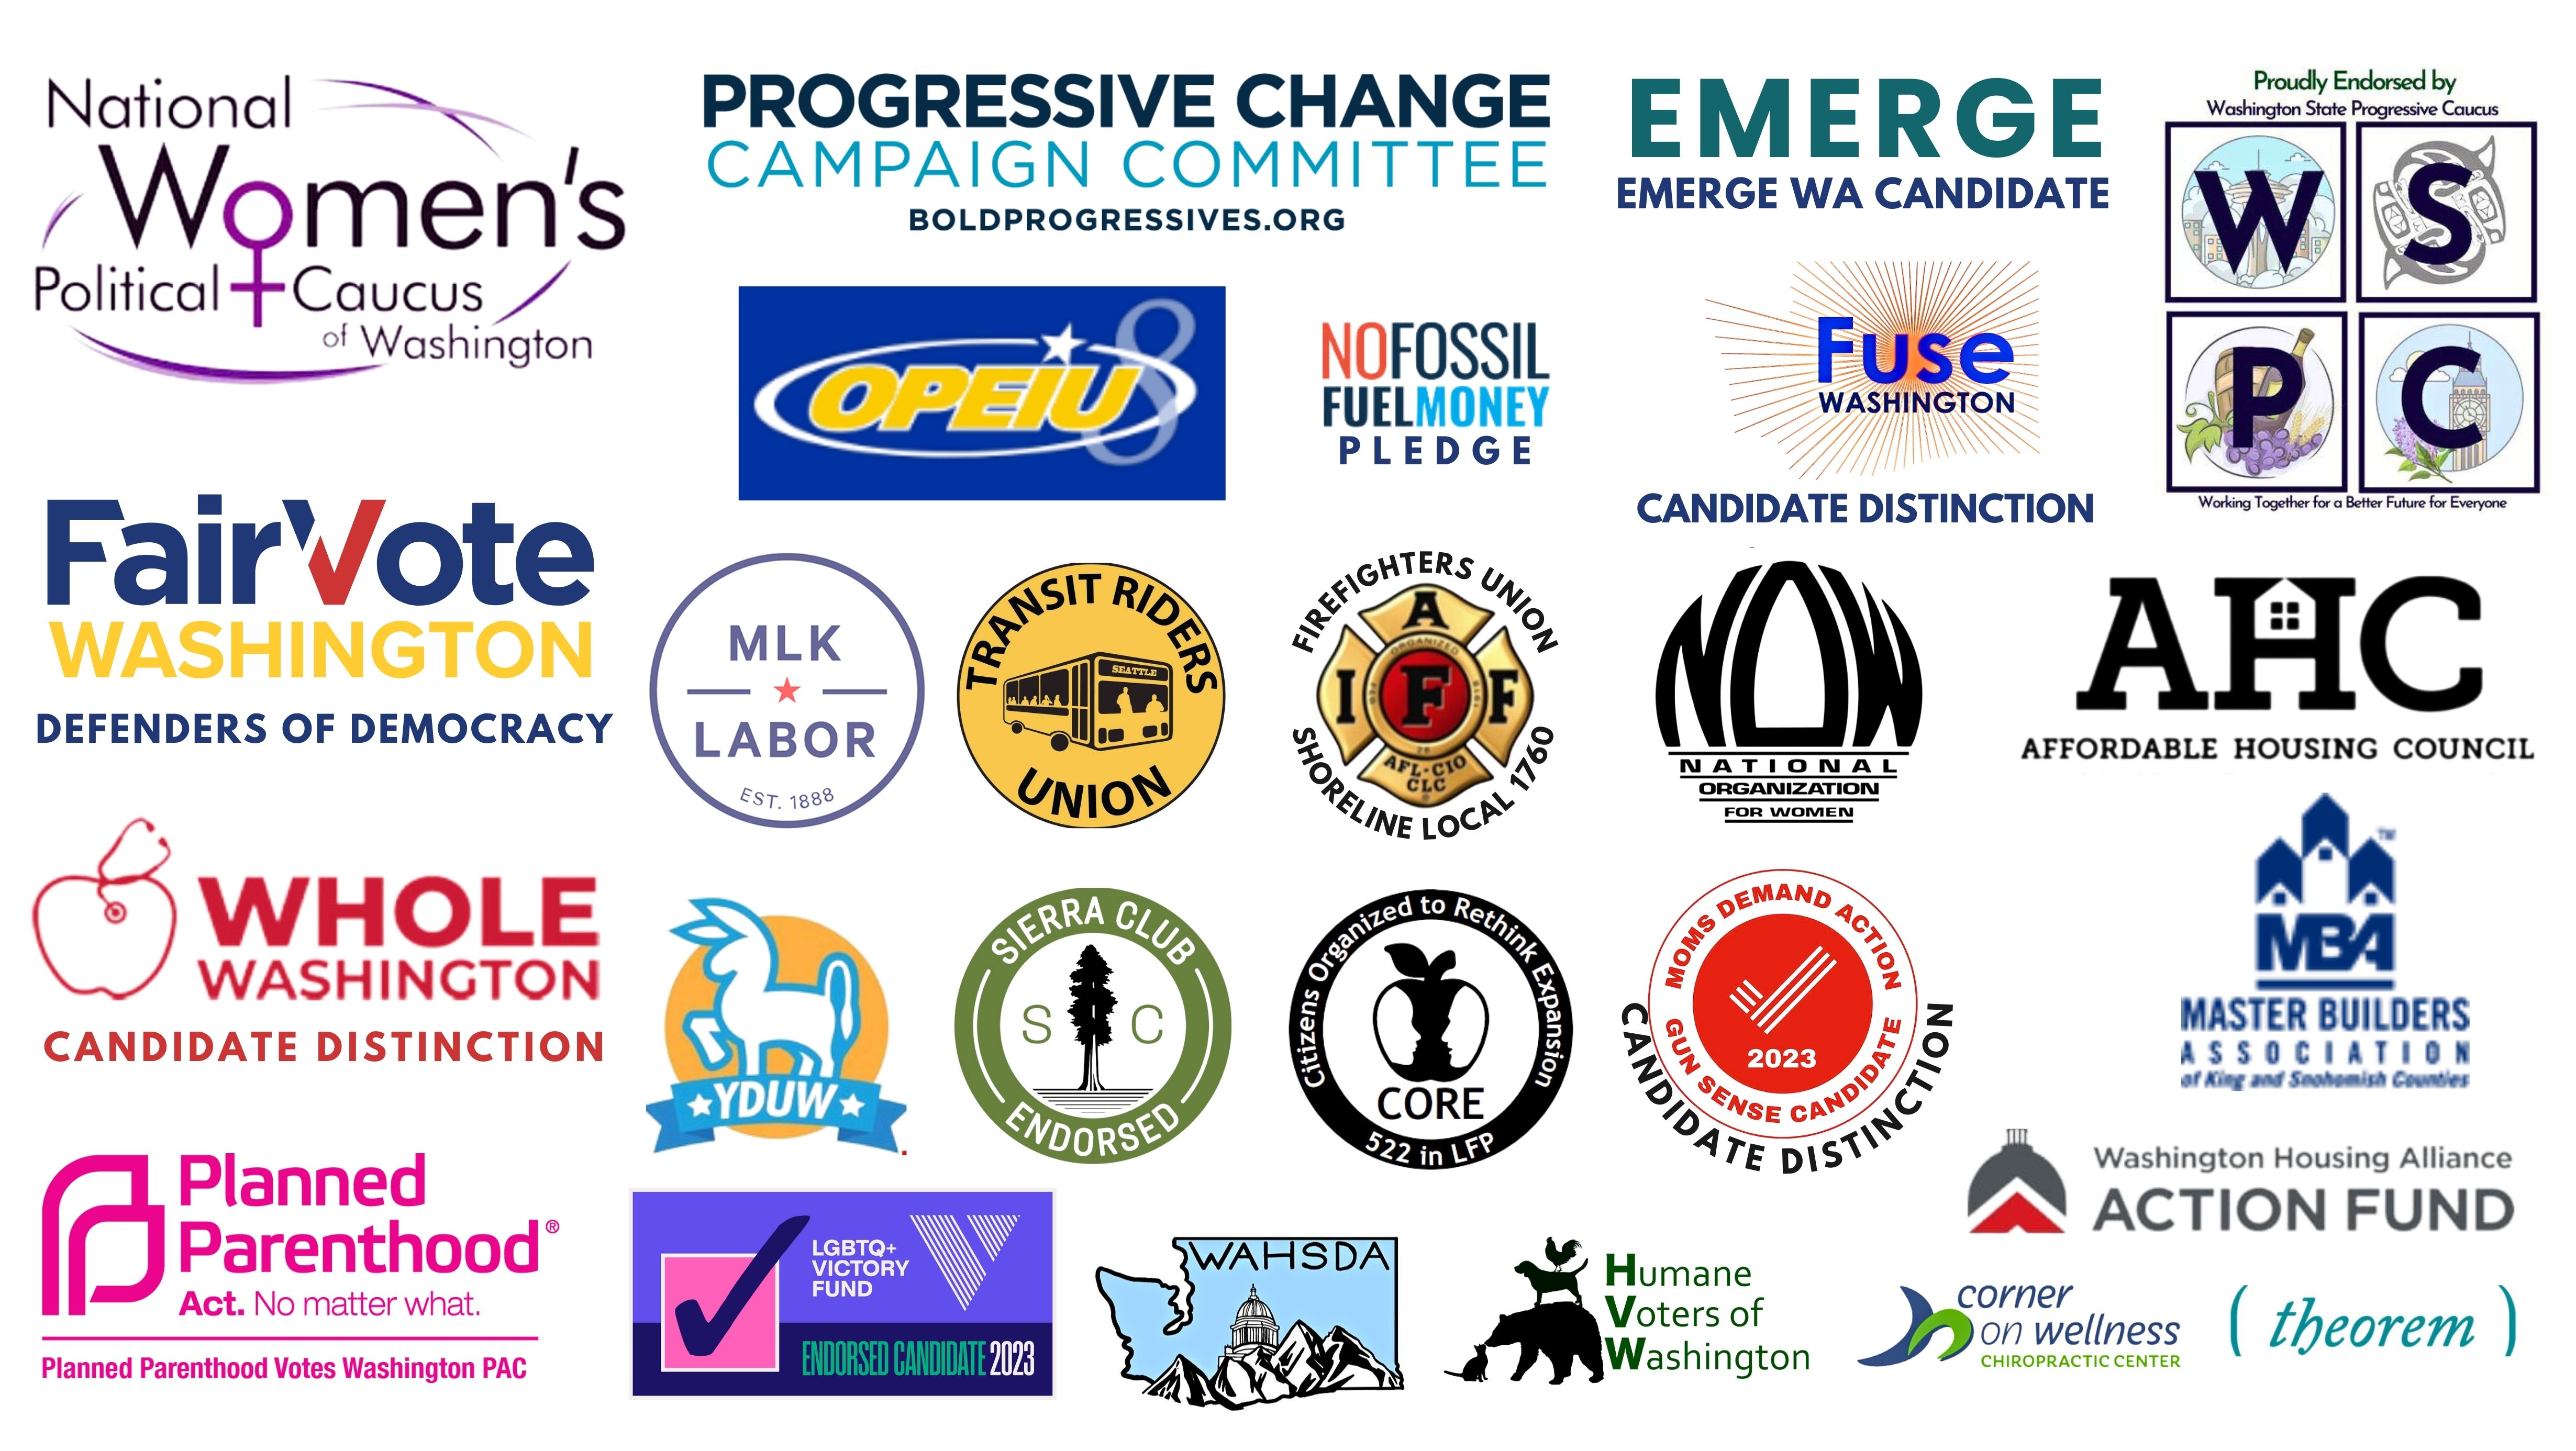 Endorsing Organization Logos: National Women's Political Caucus of WA; Progressive Change Campaign Committee, Emerge WA Candidate; WA State Progressive Caucus; Fair Vote Washington; OPEIU Local 8 Union, No Fossil Fuel Money Pledge, Fuse WA Candidate Distinction, MLK Labor Union, Transit Riders Union, Shoreline & Northshore Firefighters Local Union 1760, National Organization for Women,  Affordable Housing Council of King and Snohomish County; Whole Washington Candidate Distinction, Young Democrats of University of Washington, Sierra Club, CORE Lake Forest Park, Mom's Demand Action, Master Builders of Washington, WA Housing Alliance Action Fund; Planned Parenthood Alliance & Advocates  Planned Parenthood Votes WA PAC; LGBTQ+ Victory Fund; Washington State High School Democrats, Humane Voters of WA; Theorem; Corner of Wellness, Theorem